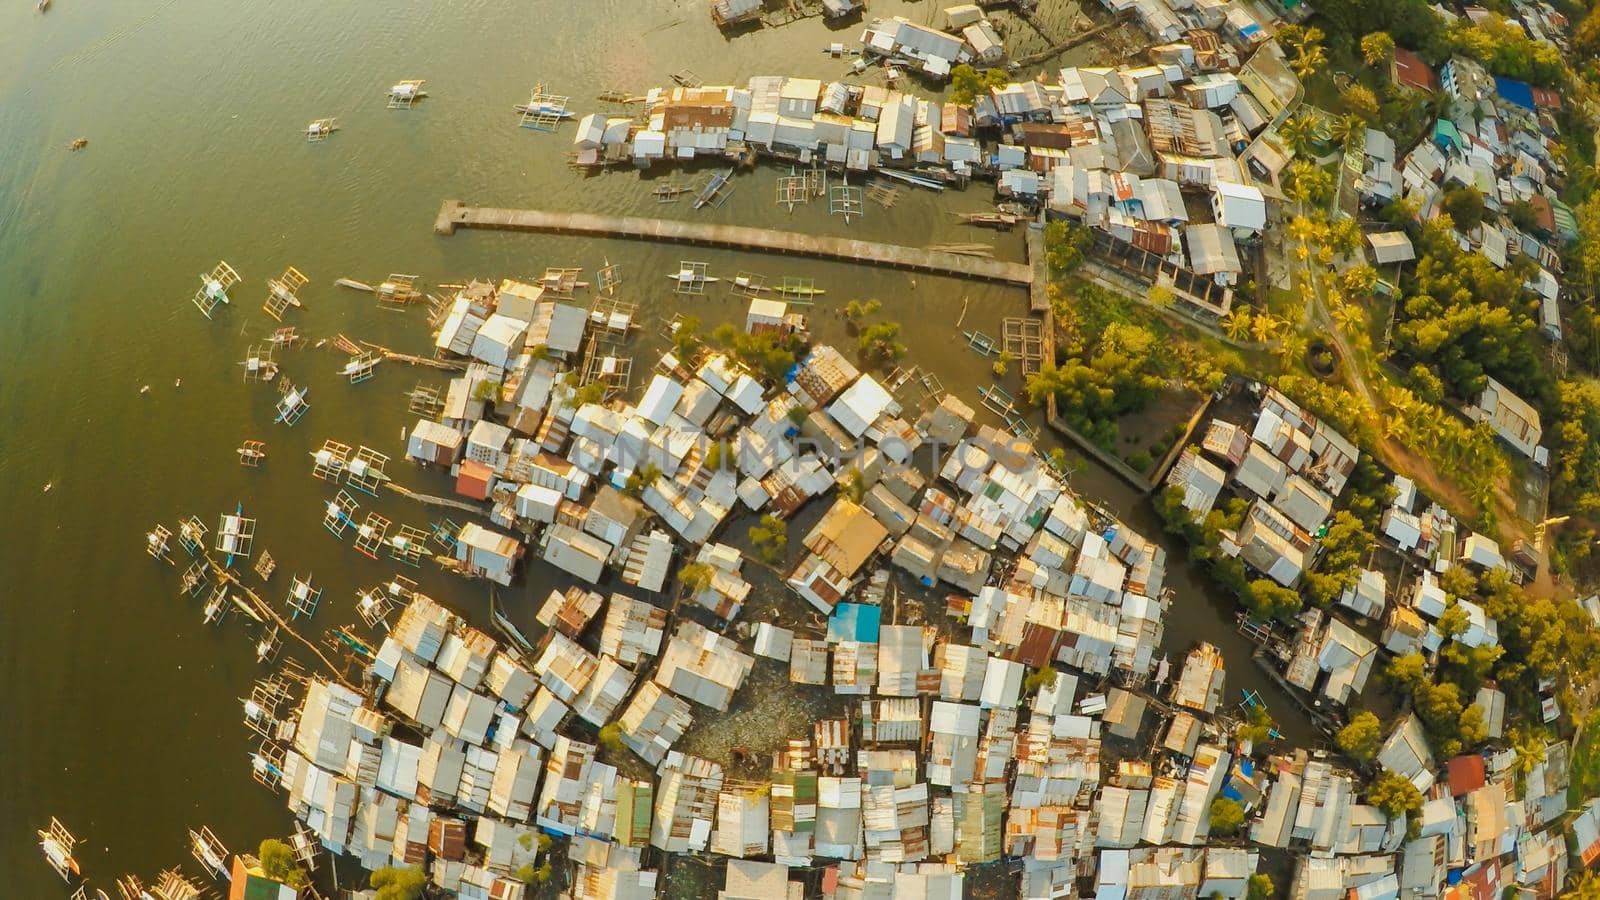 Aerial view Coron city with slums and poor district. Palawan. Bu by DovidPro